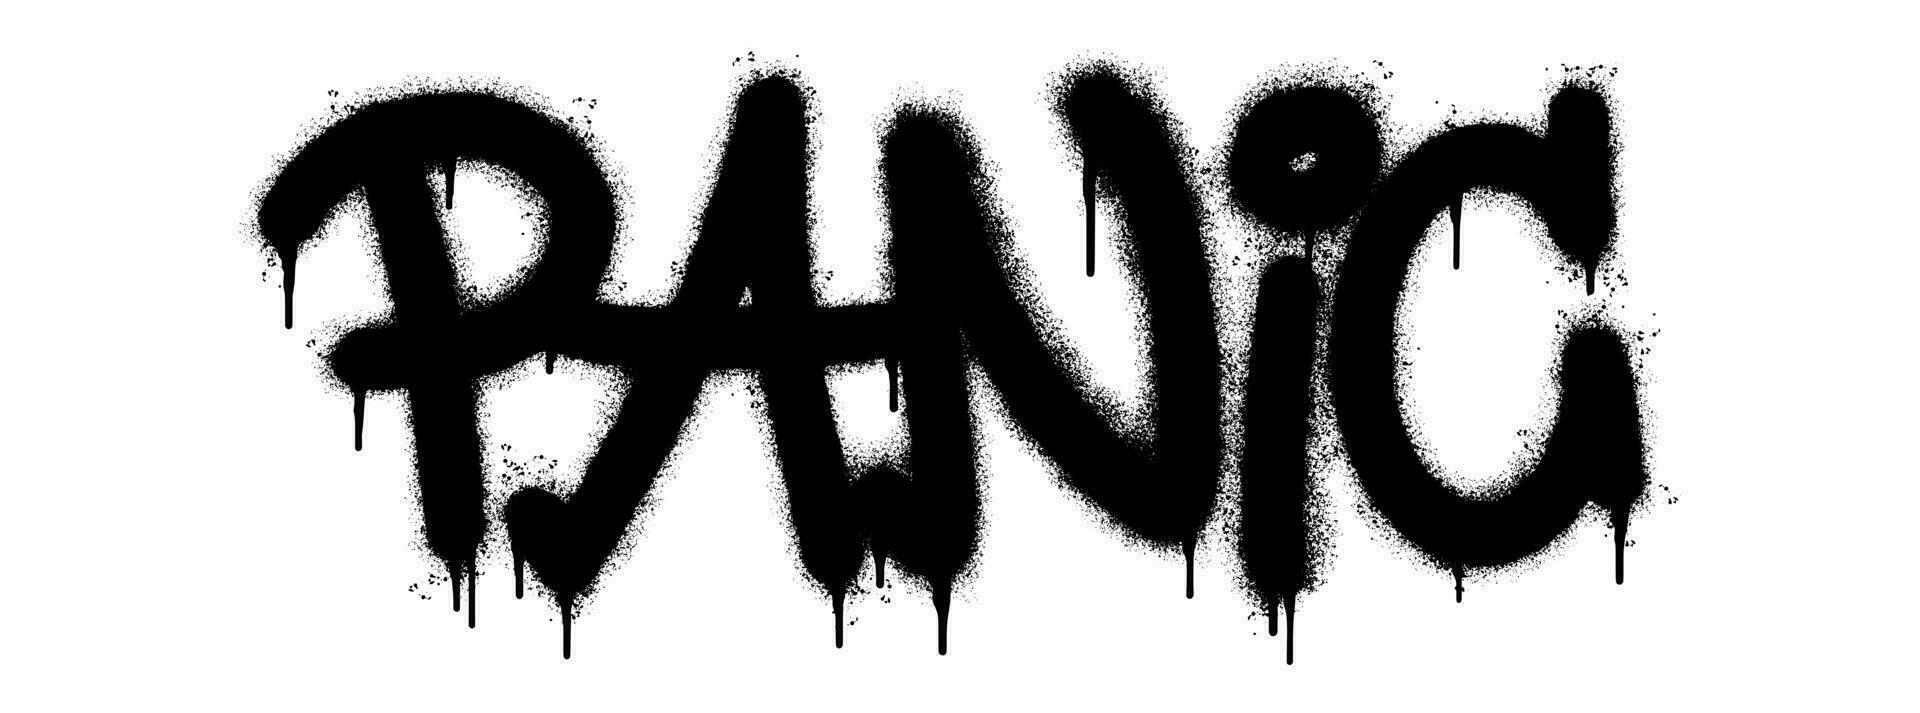 Spray Painted Graffiti panic Word Sprayed isolated with a white background. graffiti font panic with over spray in black over white. vector